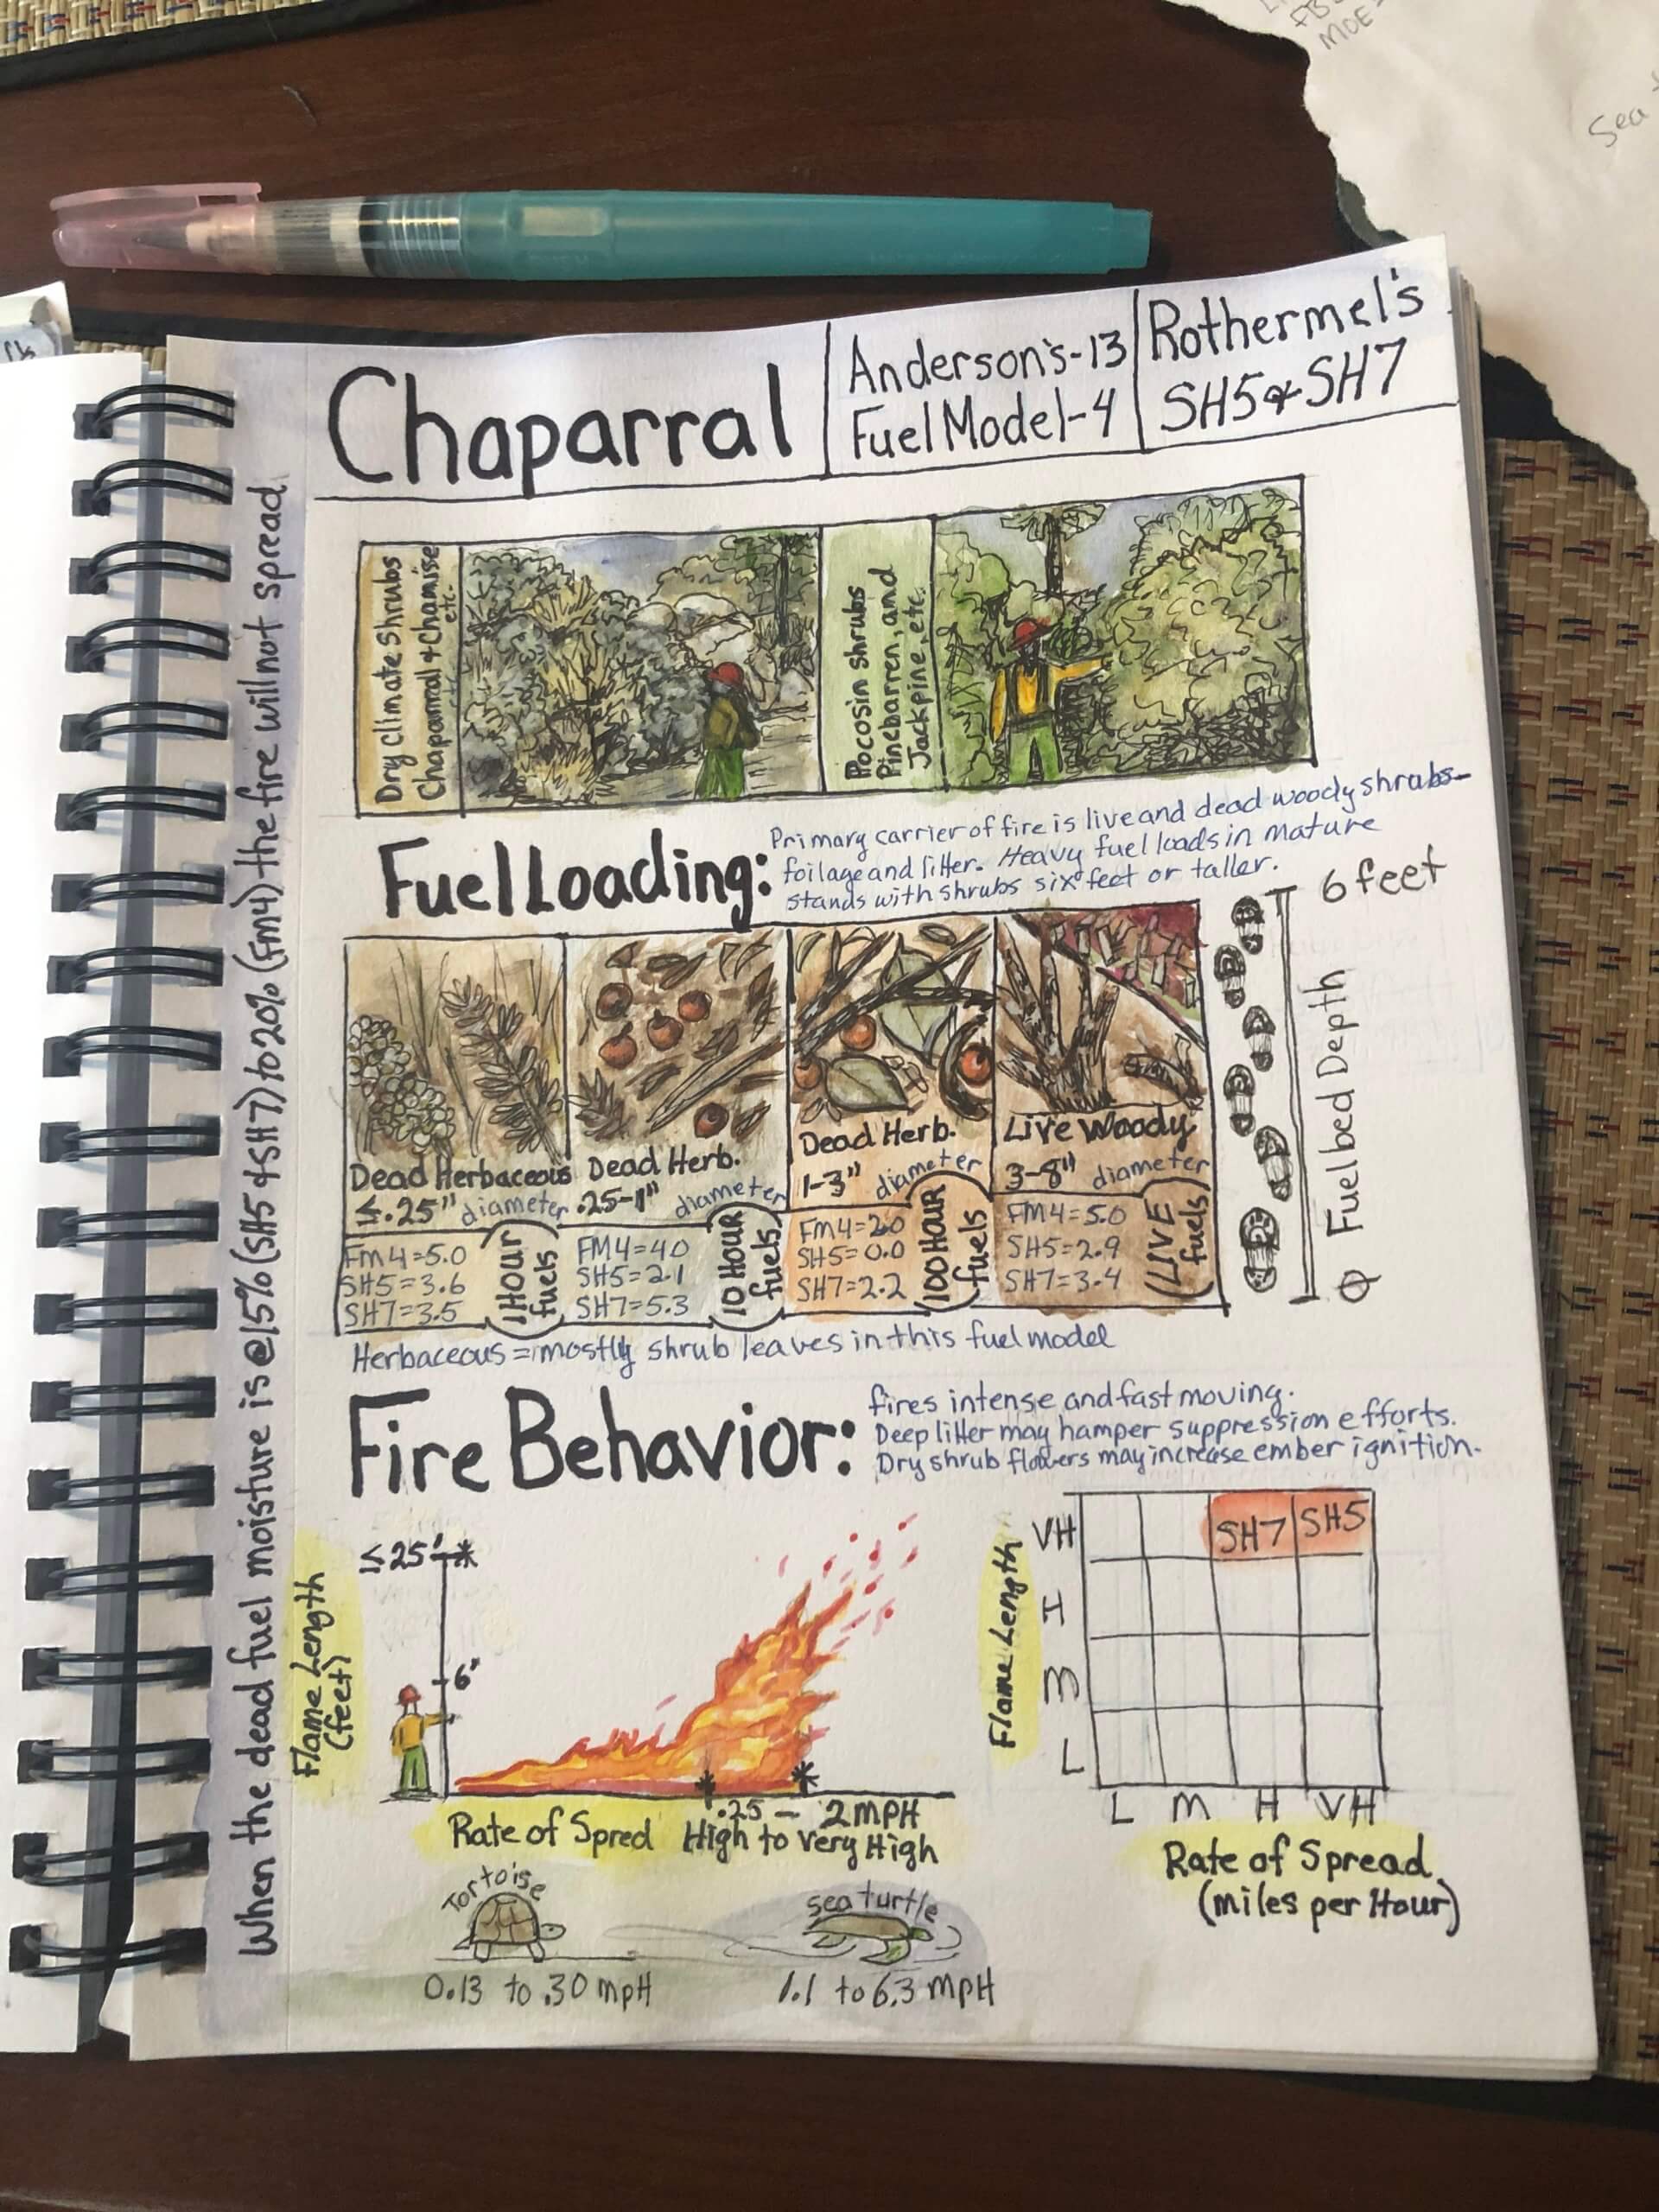 Reference fuel model guides and create your own visual version with local vegetation; use as a reference for potential fire behavior associated with various local vegetation types.